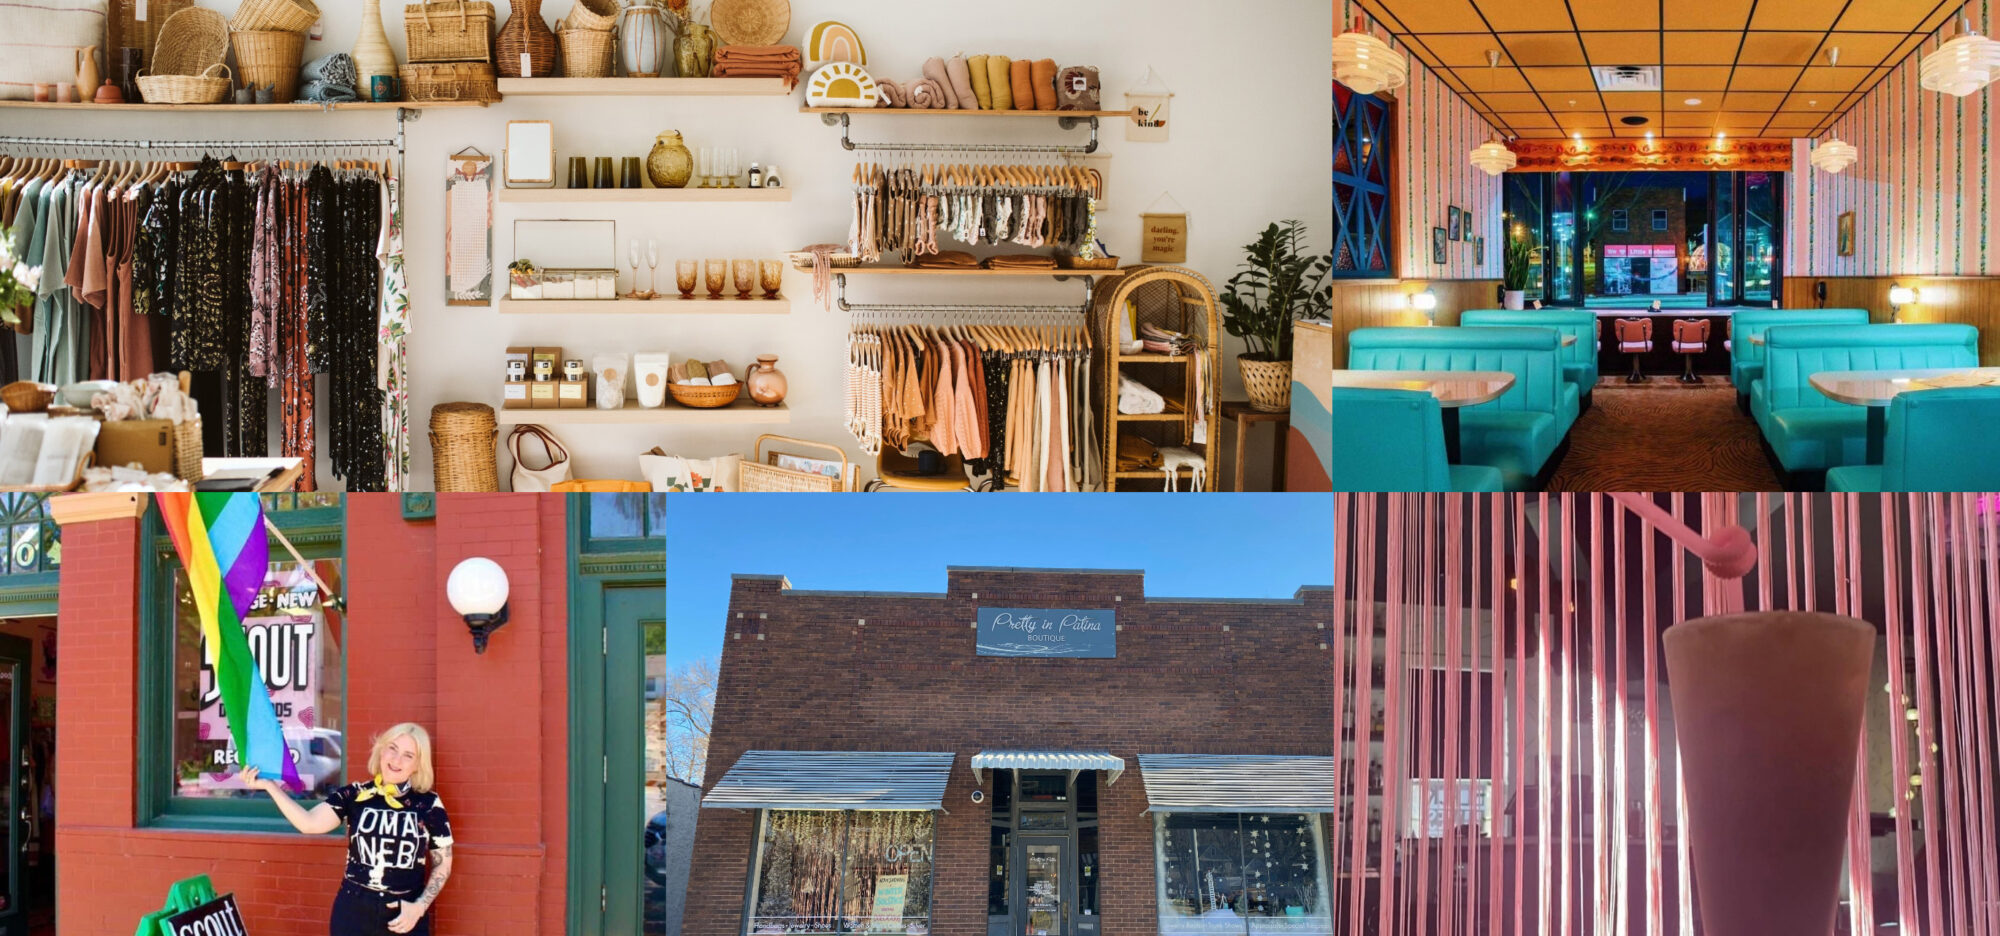 Dusk Goods and Gifts, Fizzy's Omaha, Tiny House, Scout